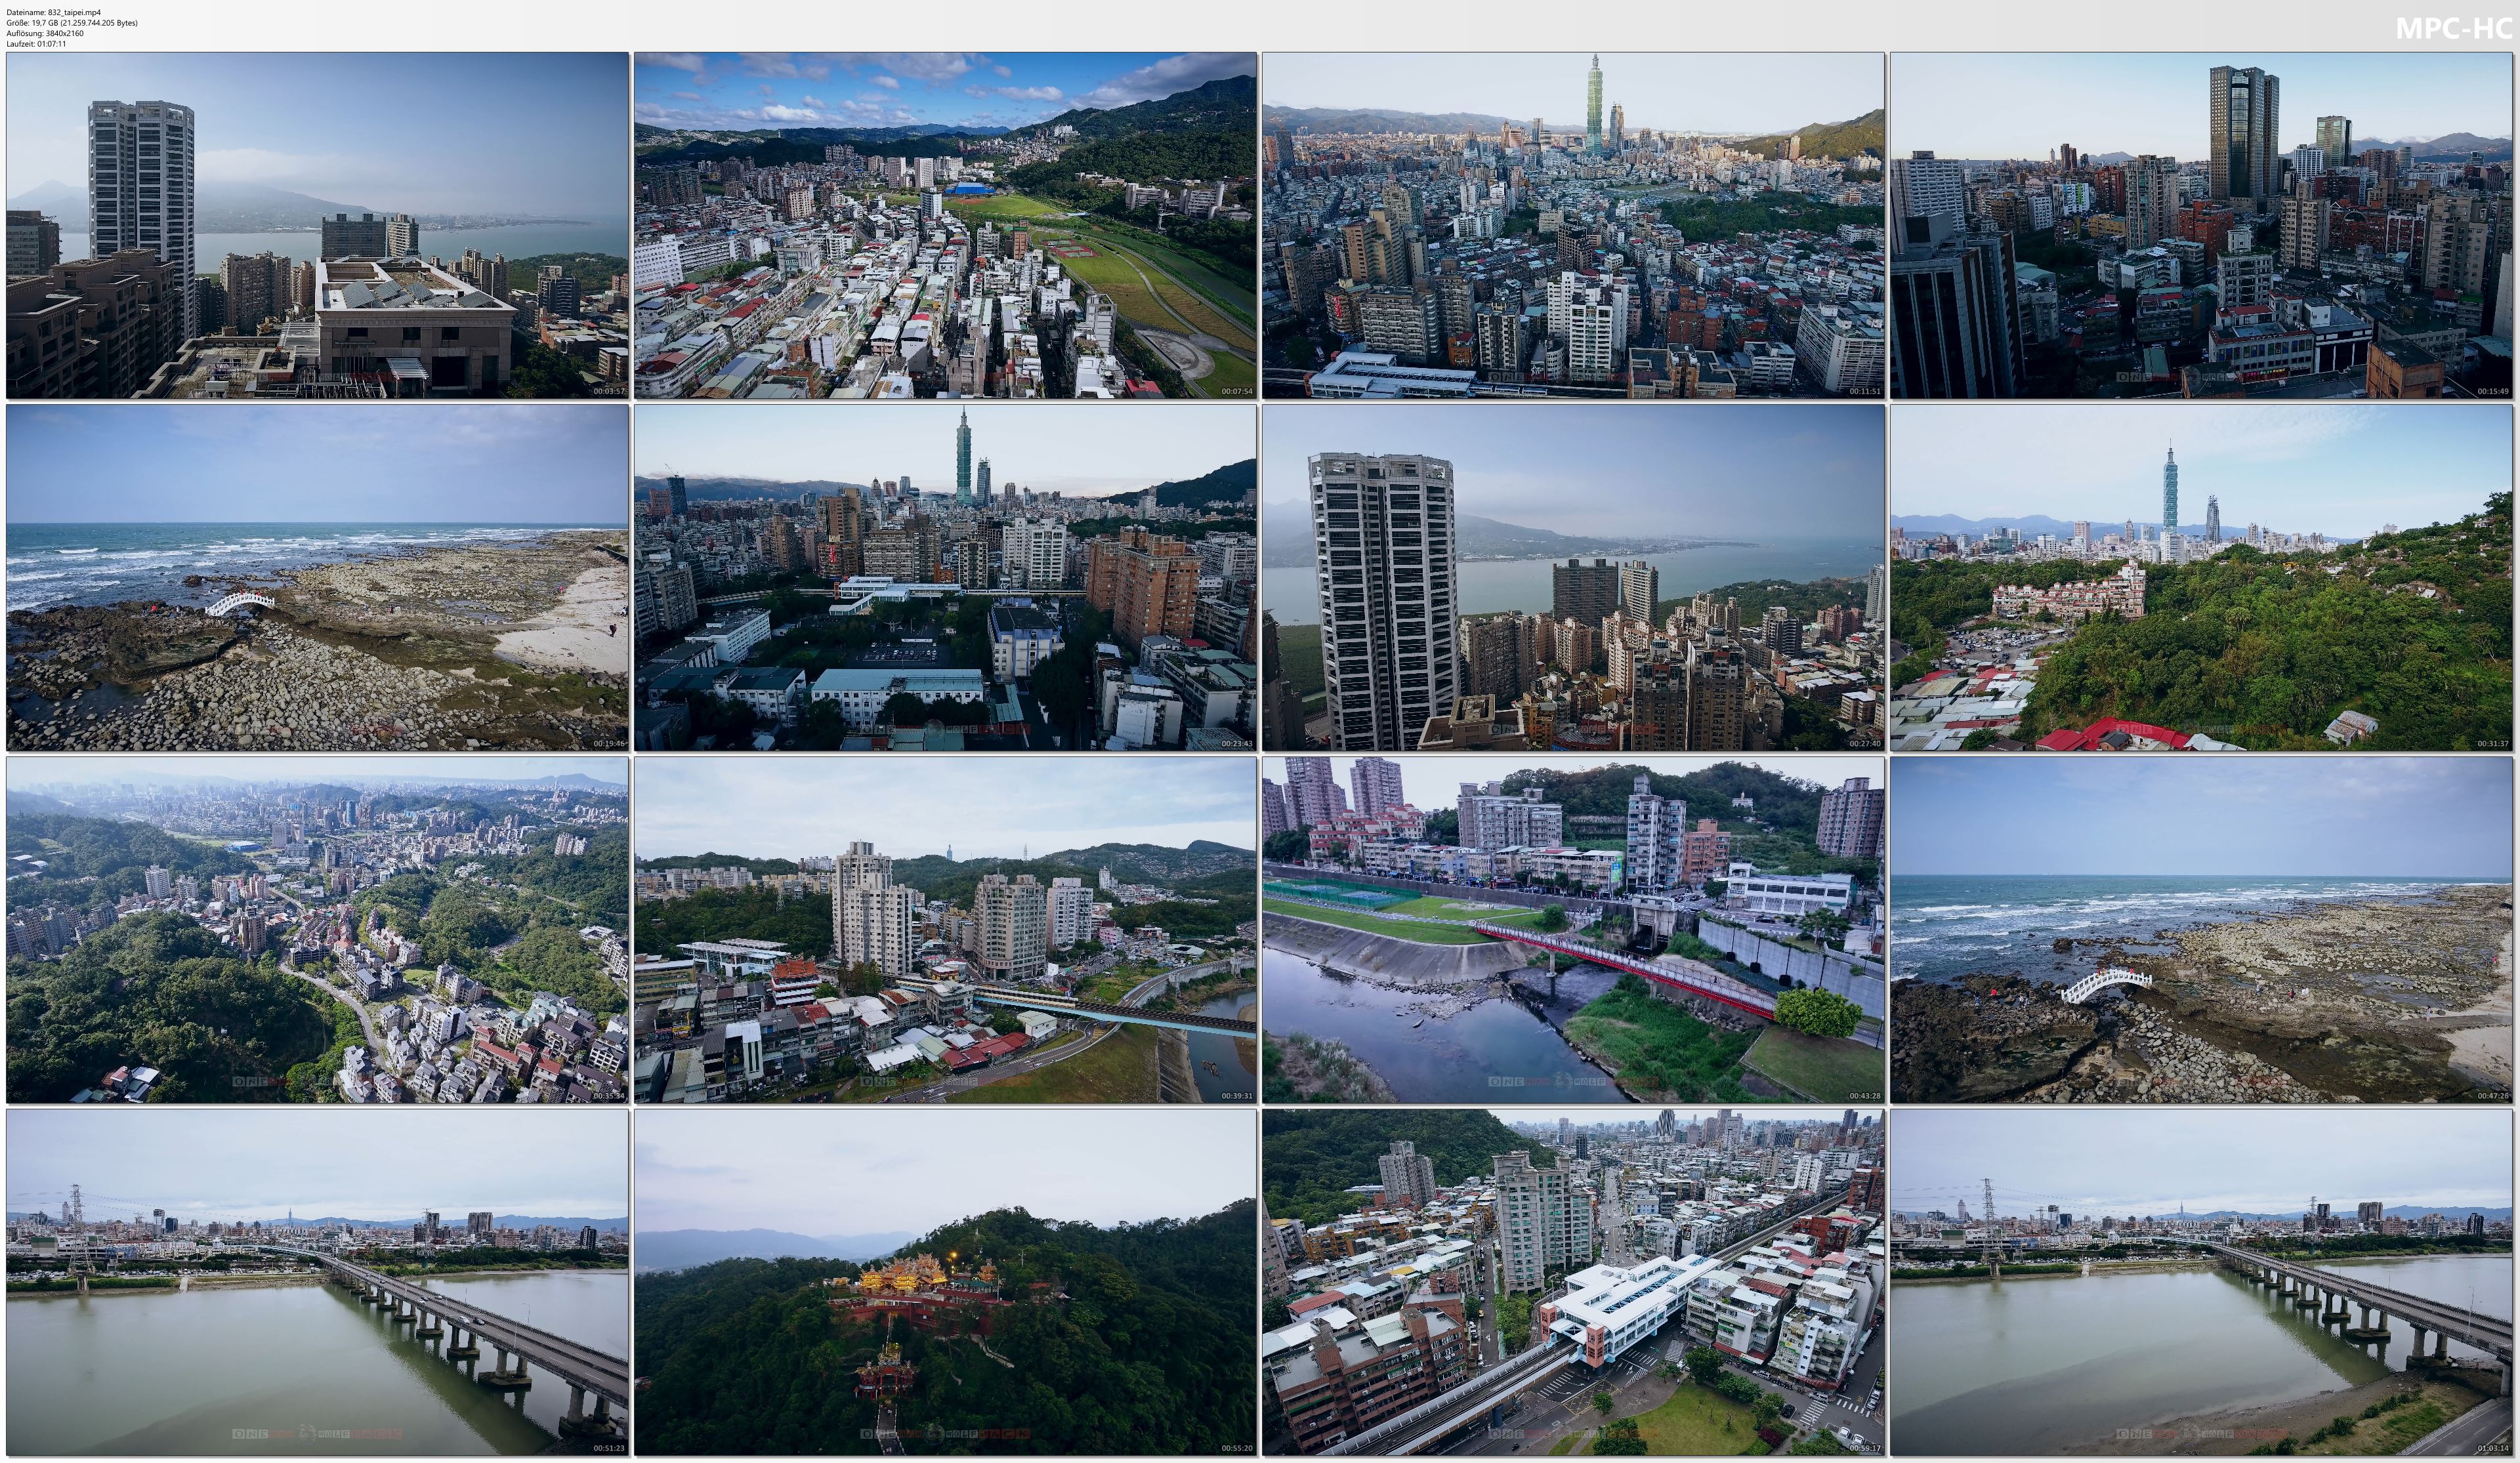 Drone Pictures from Video 【4K】1 HOUR DRONE FILM: «Taipei - Capital of Taiwan» || Ultra HD | Chillout (2160p Ambient UHD TV)